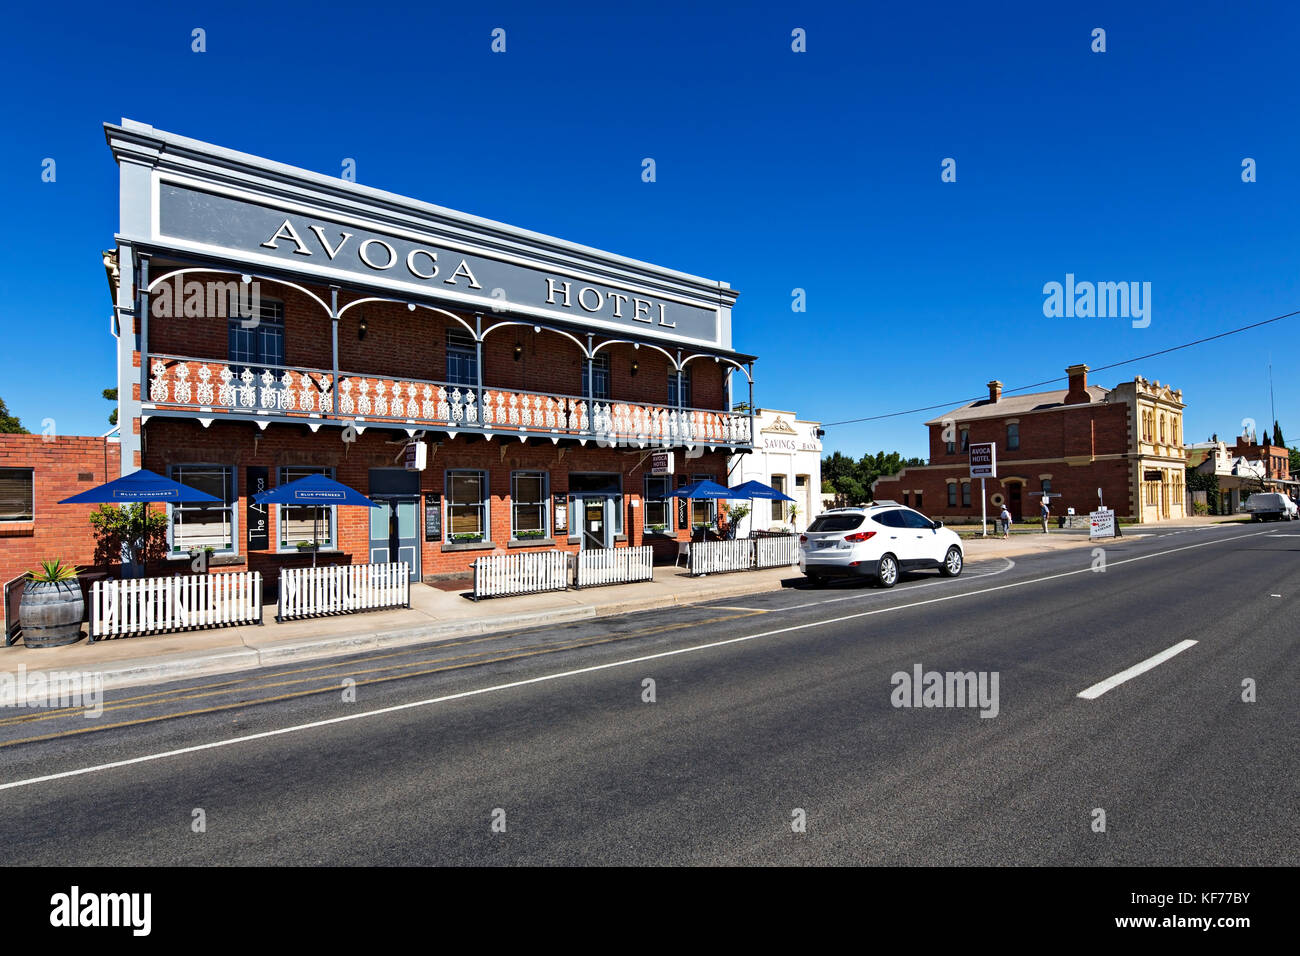 Gold was discovered in Avoca in 1852 and drinking establishments like the Avoca Hotel did a roaring trade on the goldfields. Stock Photo